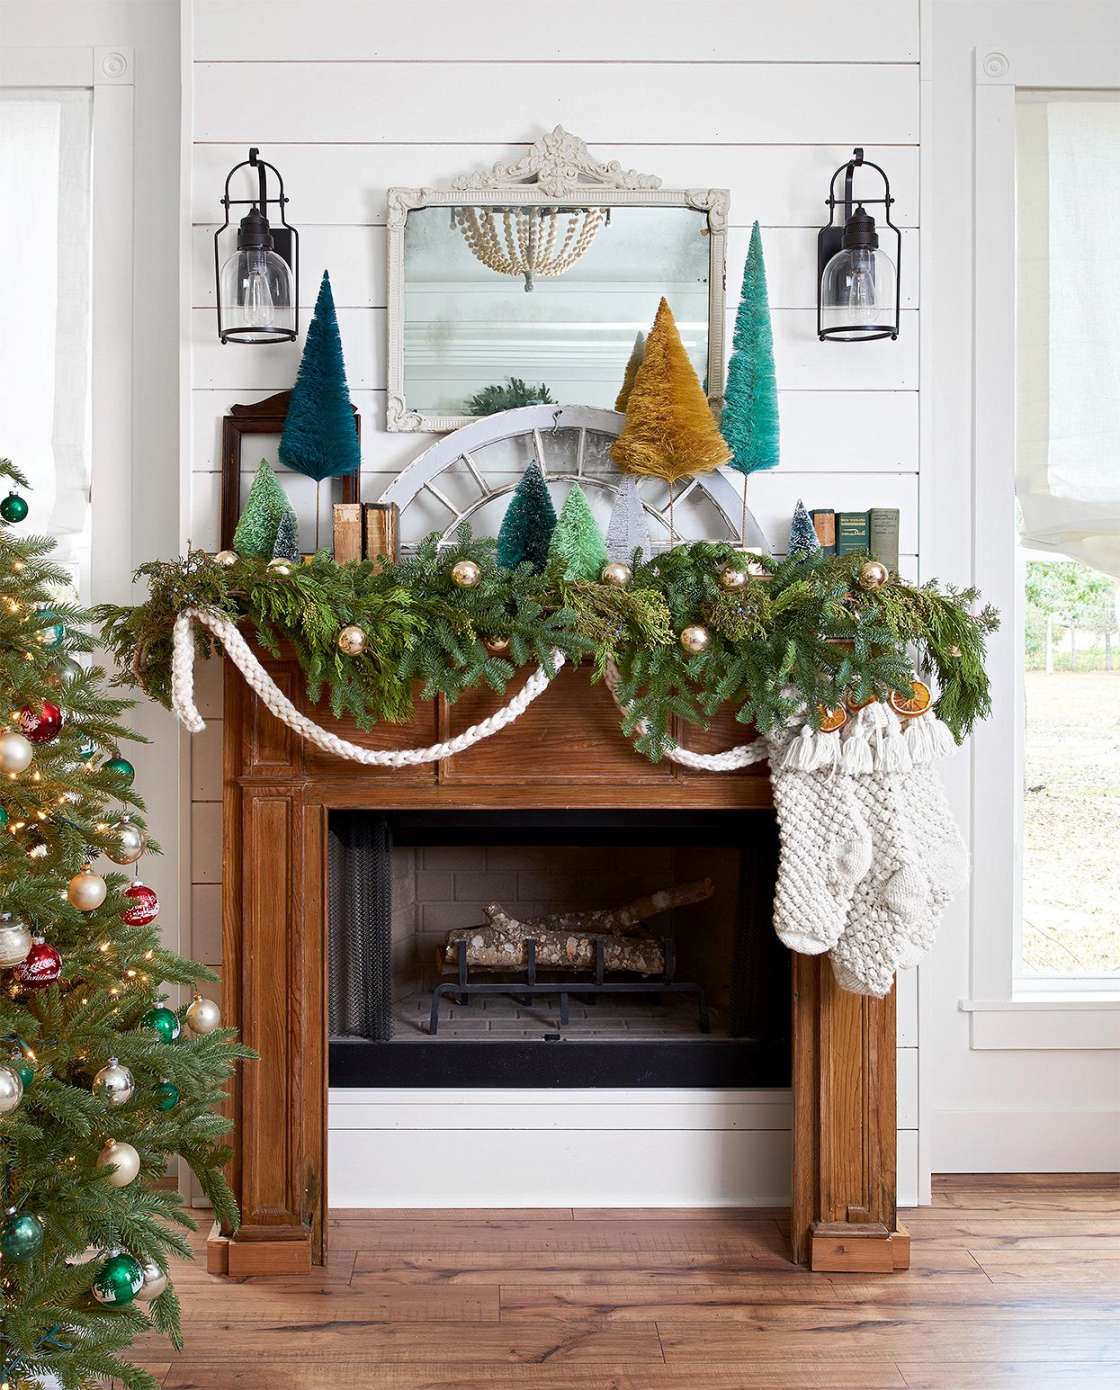 DIY Christmas Garlands to Drape Your Home in Holiday Cheer